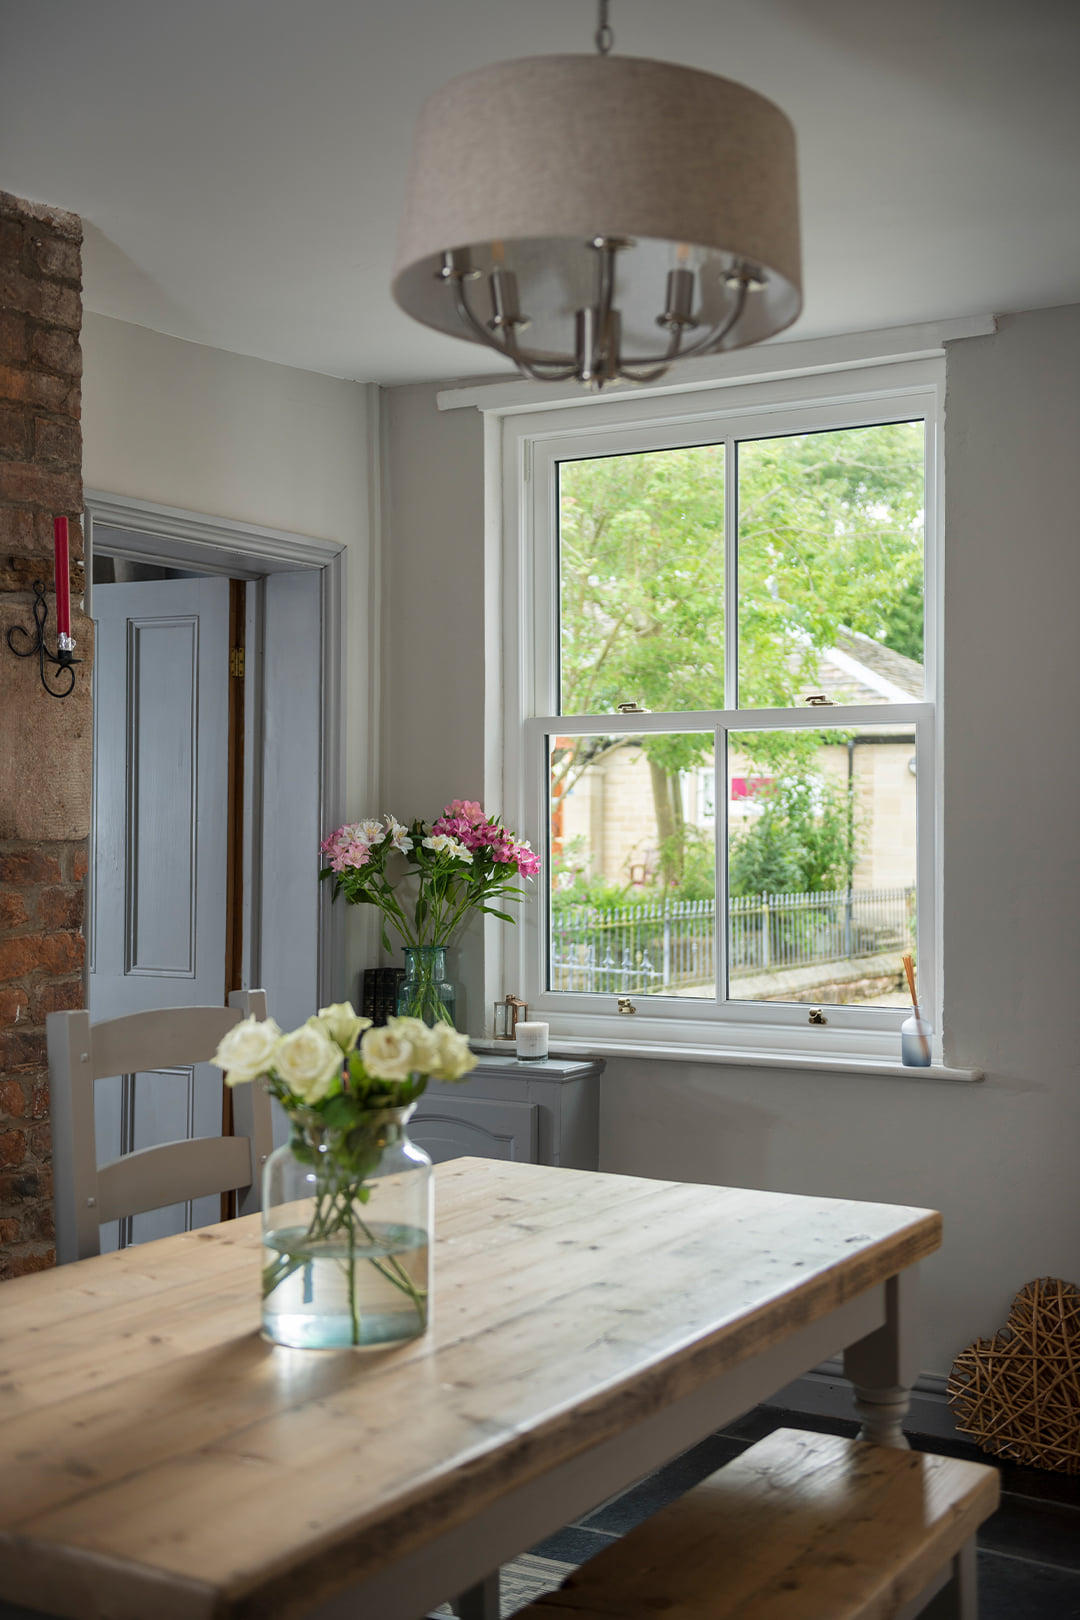 Anglian sash windows are the ideal windows for period properties to preserve the traditional beauty, Maintaining the traditional style, we have added modern technology so you can get the most from your new sash windows.